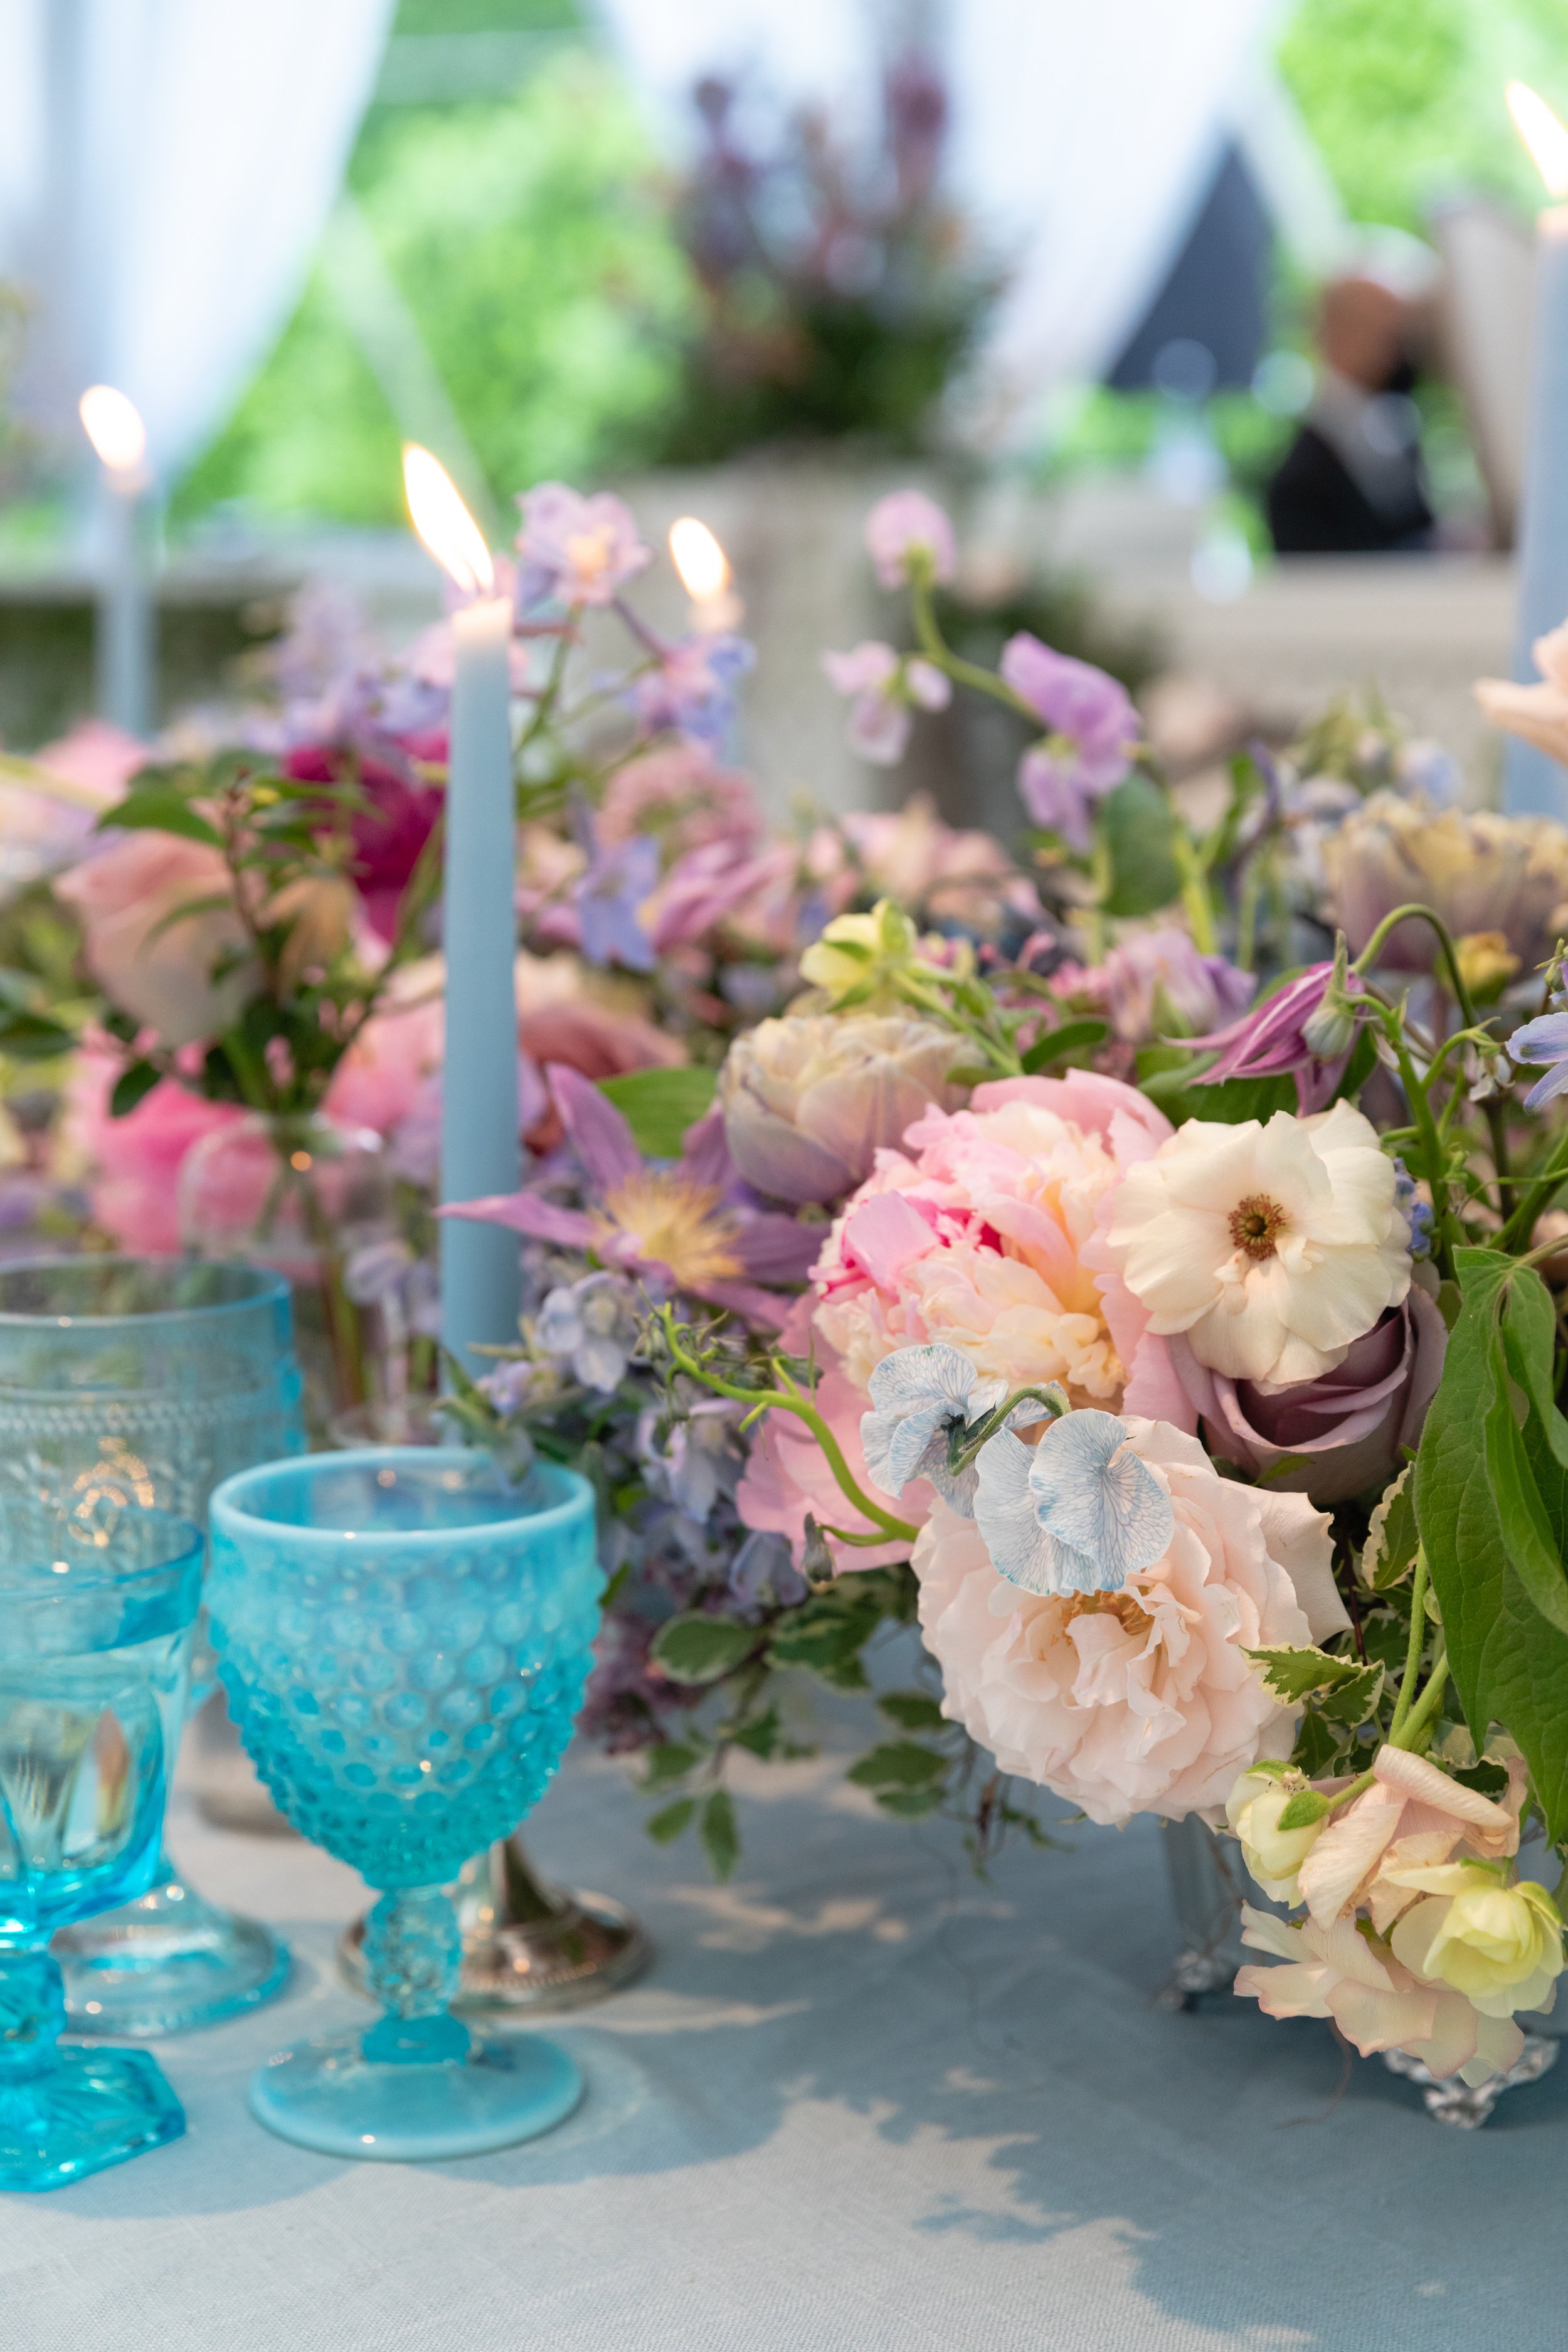 Growing, fresh floral centerpieces with blush garden roses, lilac, blue sweet peas, ranunculus, lavender delphinium, globe allium, clematis, and natural greenery for a tented Bridgerton inspired engagement party at a private home in Nashville, TN. Fl